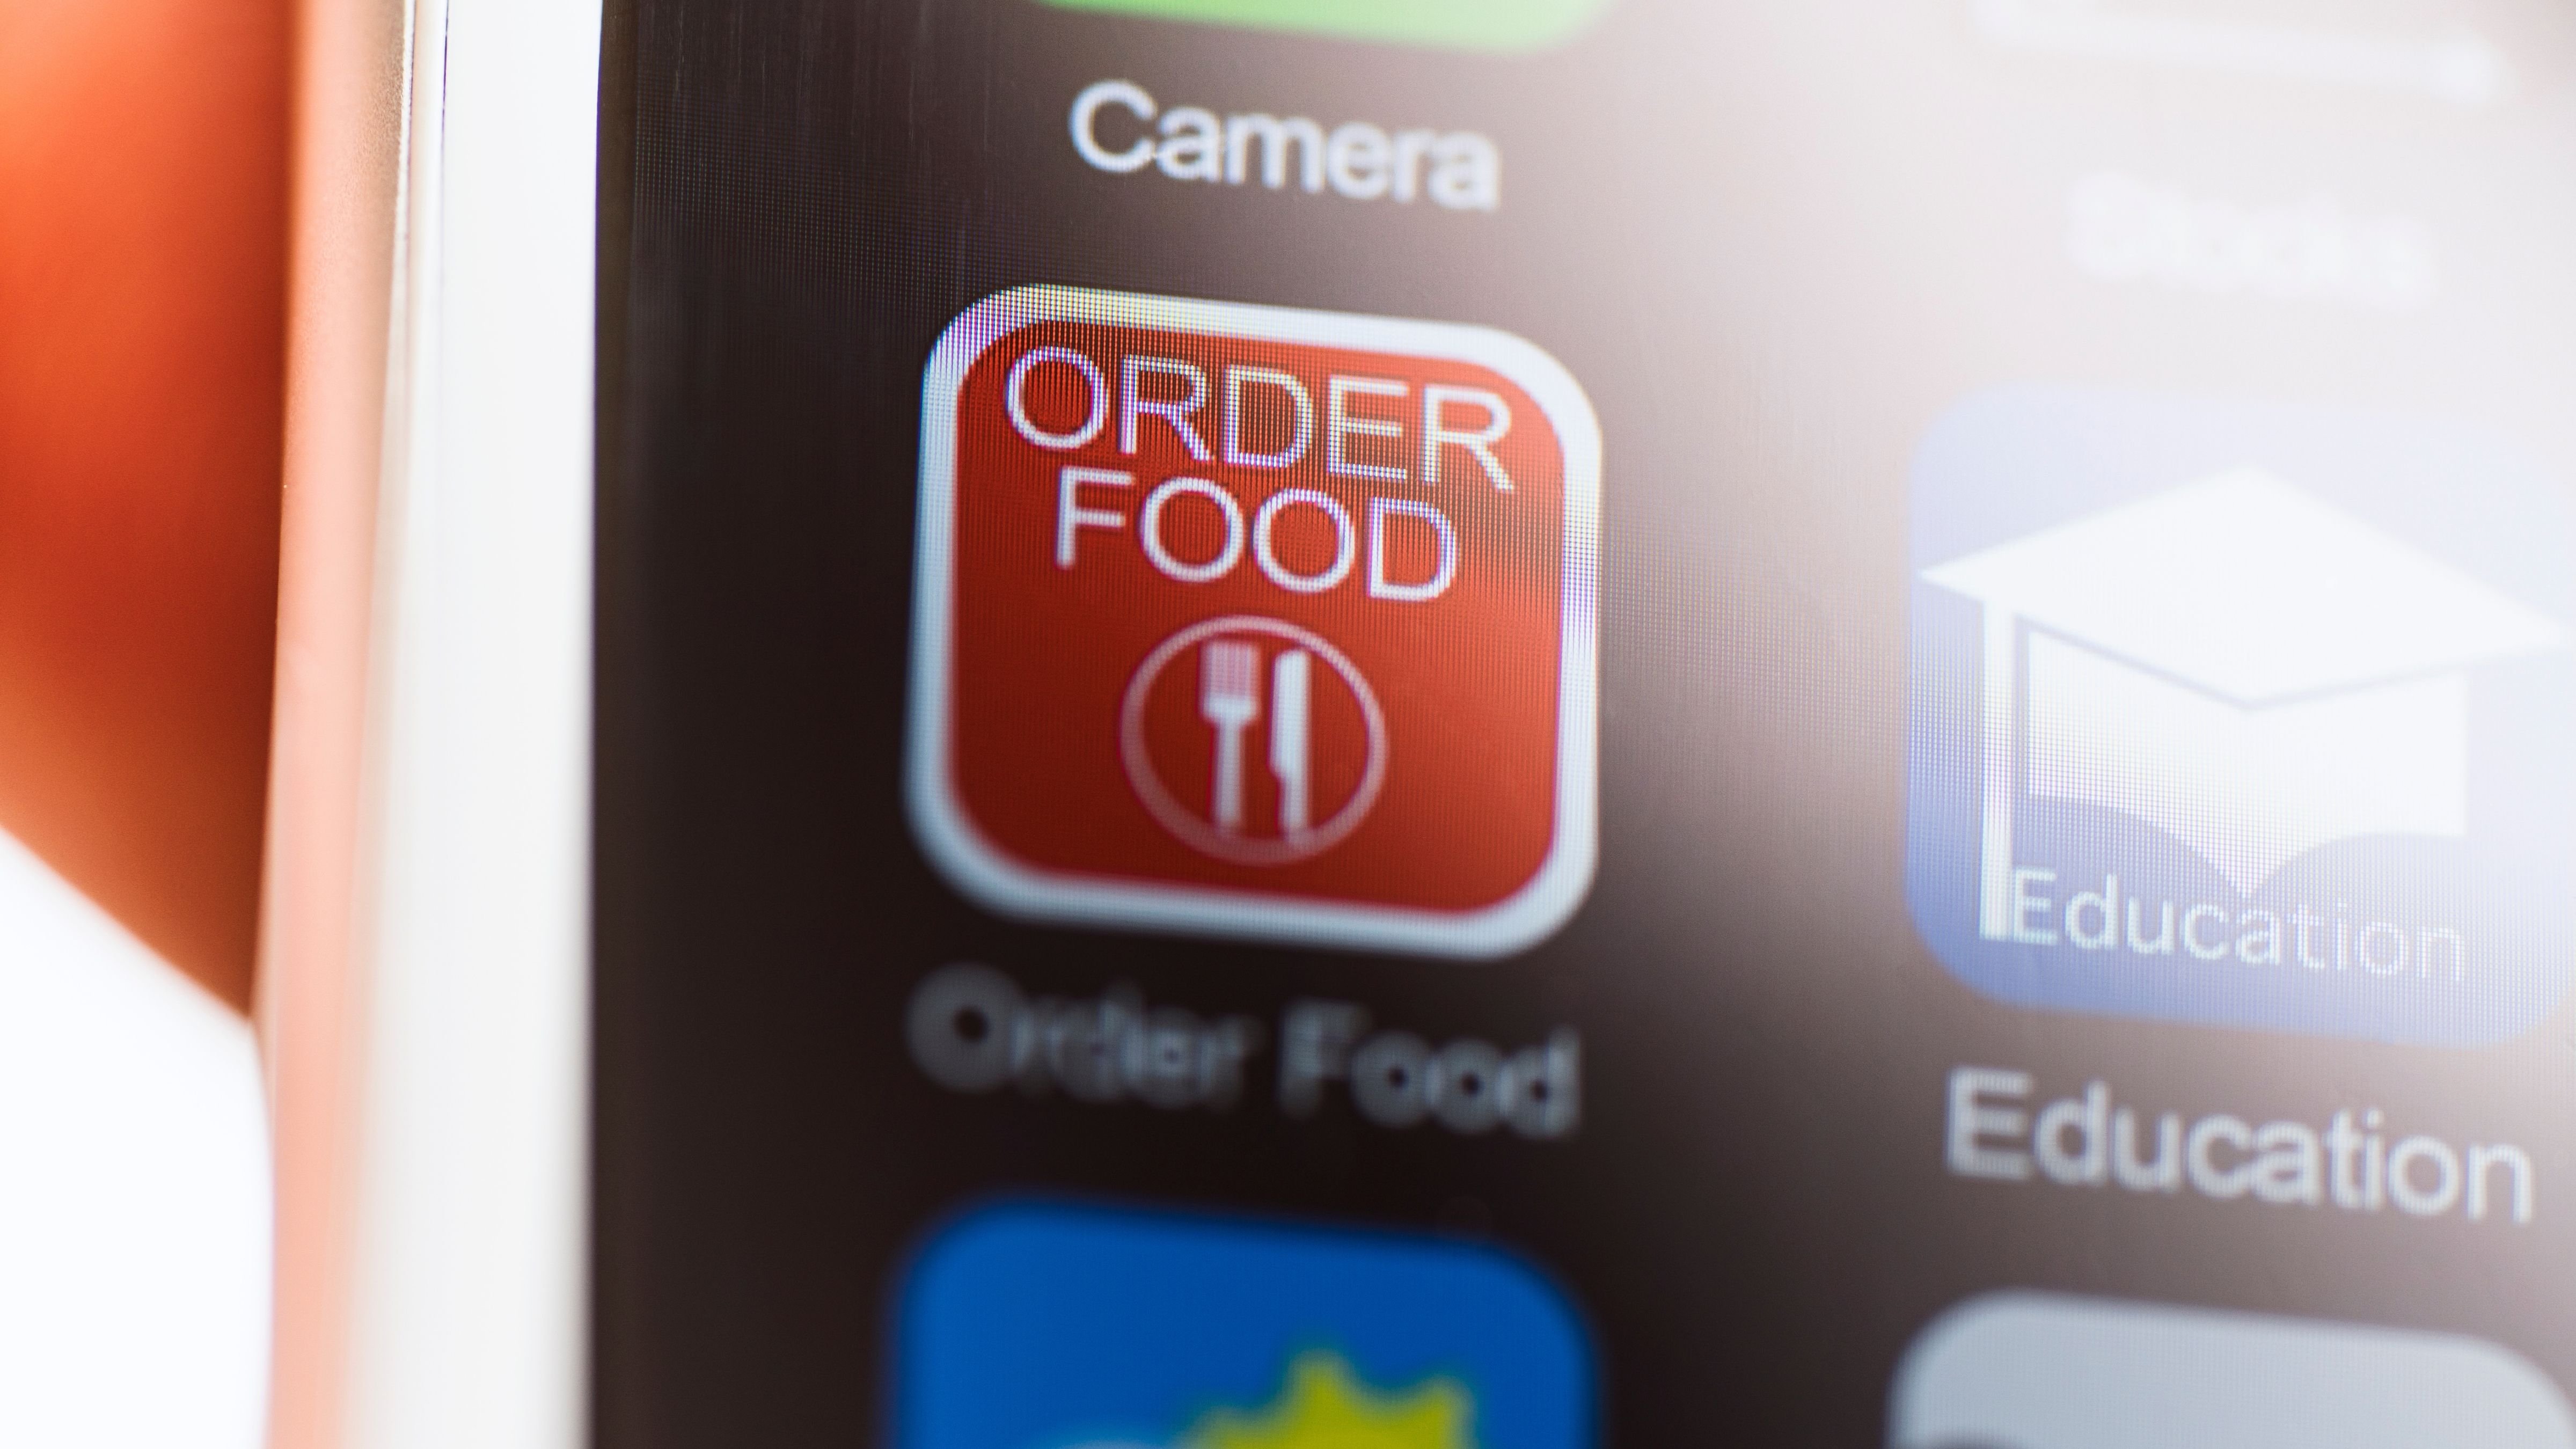 The benefits of using a white label app for your restaurant